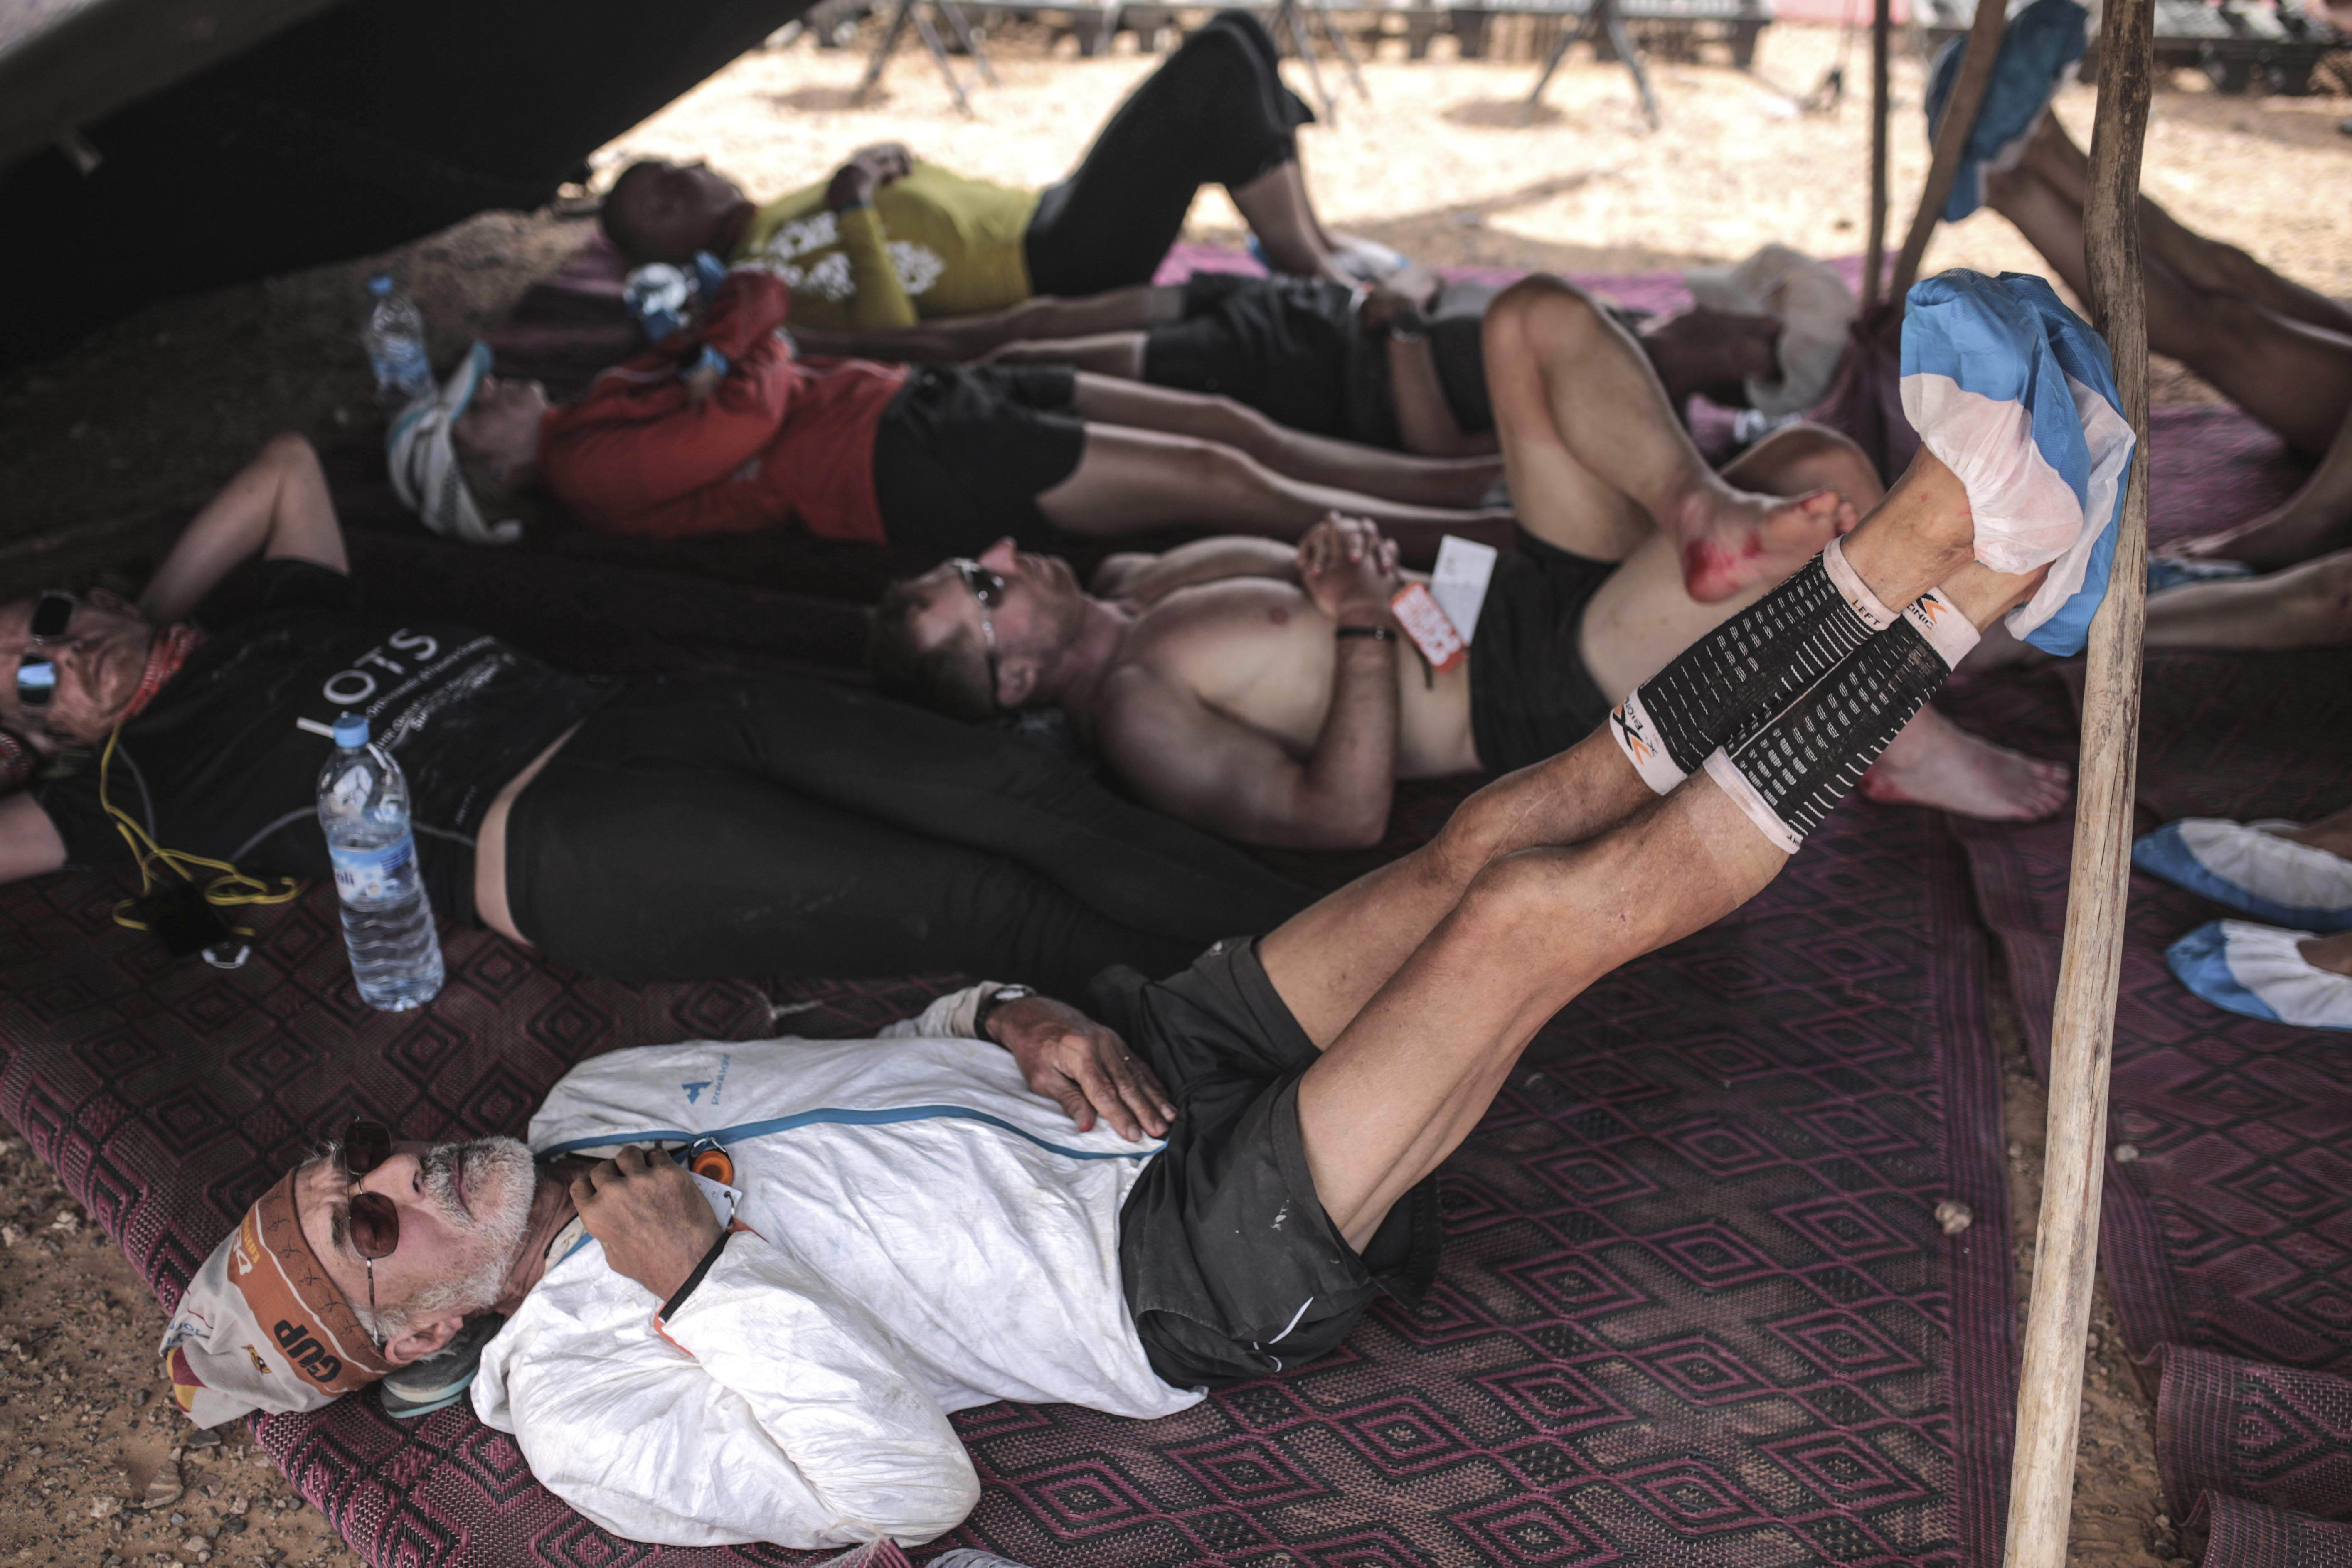 Competitors rest after finishing stage 4 of the 33rd edition of Marathon des Sables, in the Sahara desert, near Ouarzazate, southern Morocco, Wednesday, April 12, 2018. The marathon, held every year in Morocco, is a 250 km ultra-trail that takes part over 6 stages in extremely grueling conditions. (AP Photo/Mosa'ab Elshamy)